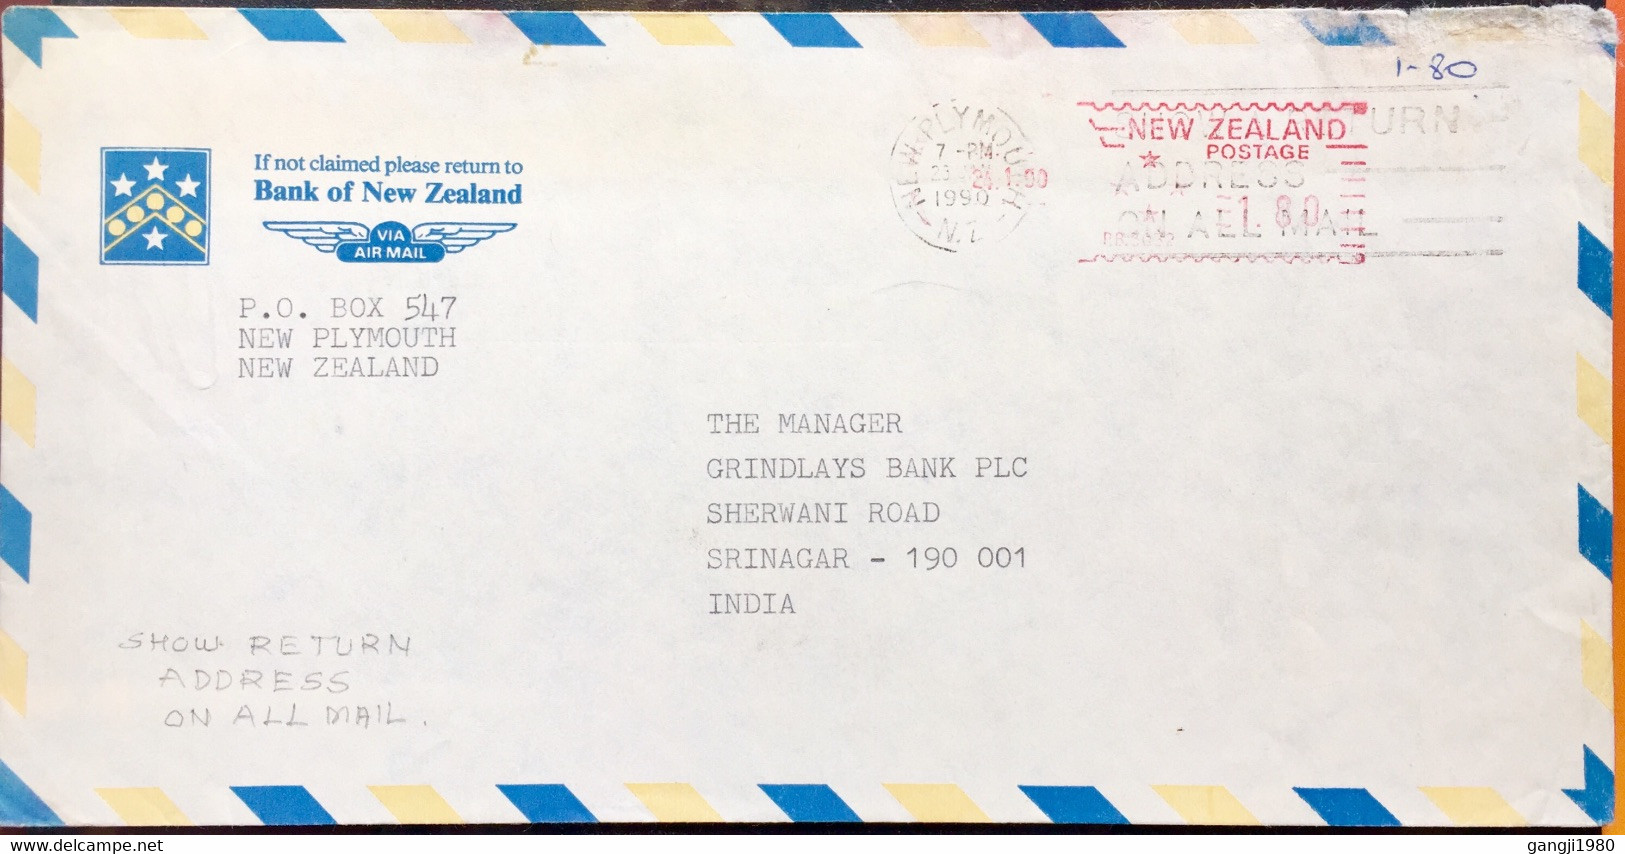 NEW ZEALAND 1990 SHOW RETURN ADDRESS ON ALL MAIL SLOGAN,NEW PLYMOUTH TO INDIA BANK OF NEW ZEALAND METER CANCELLATION - Lettres & Documents